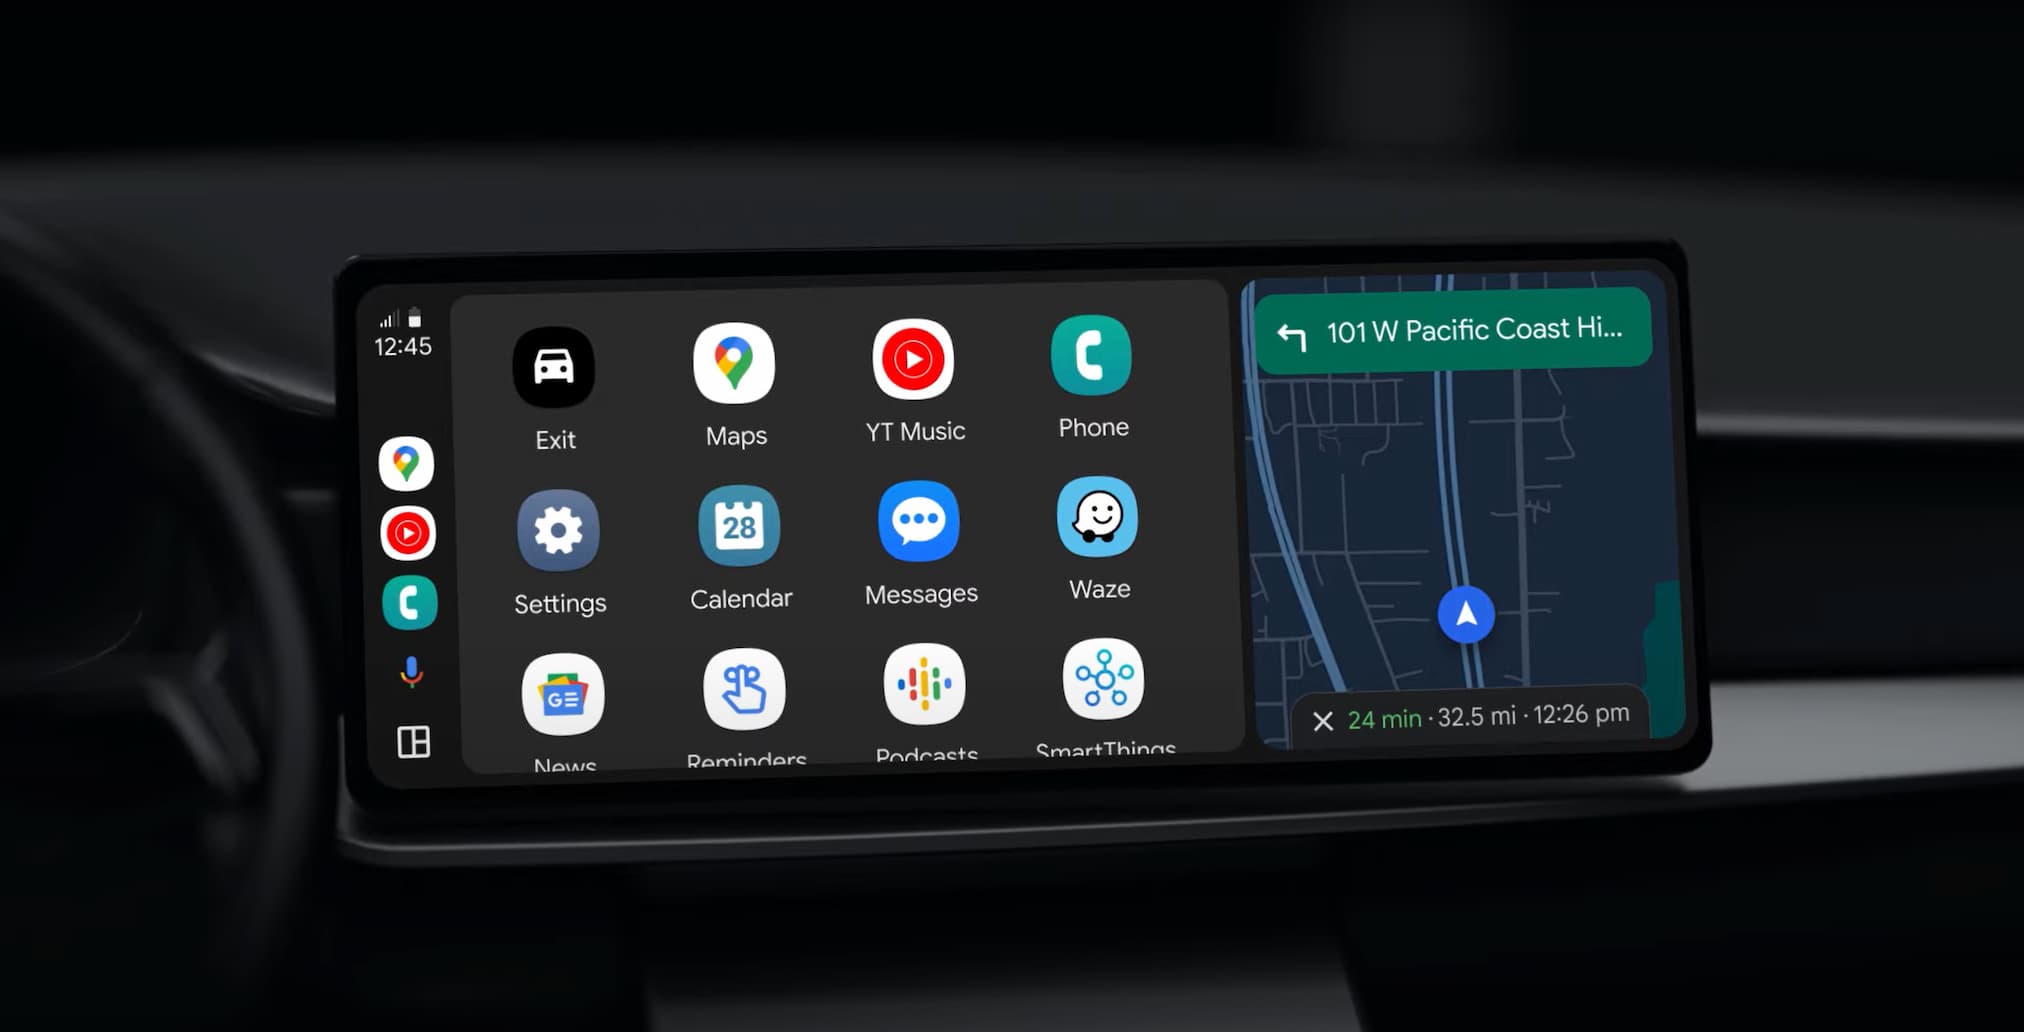 [Download] Android Auto 11.4 stable version rolling out to all